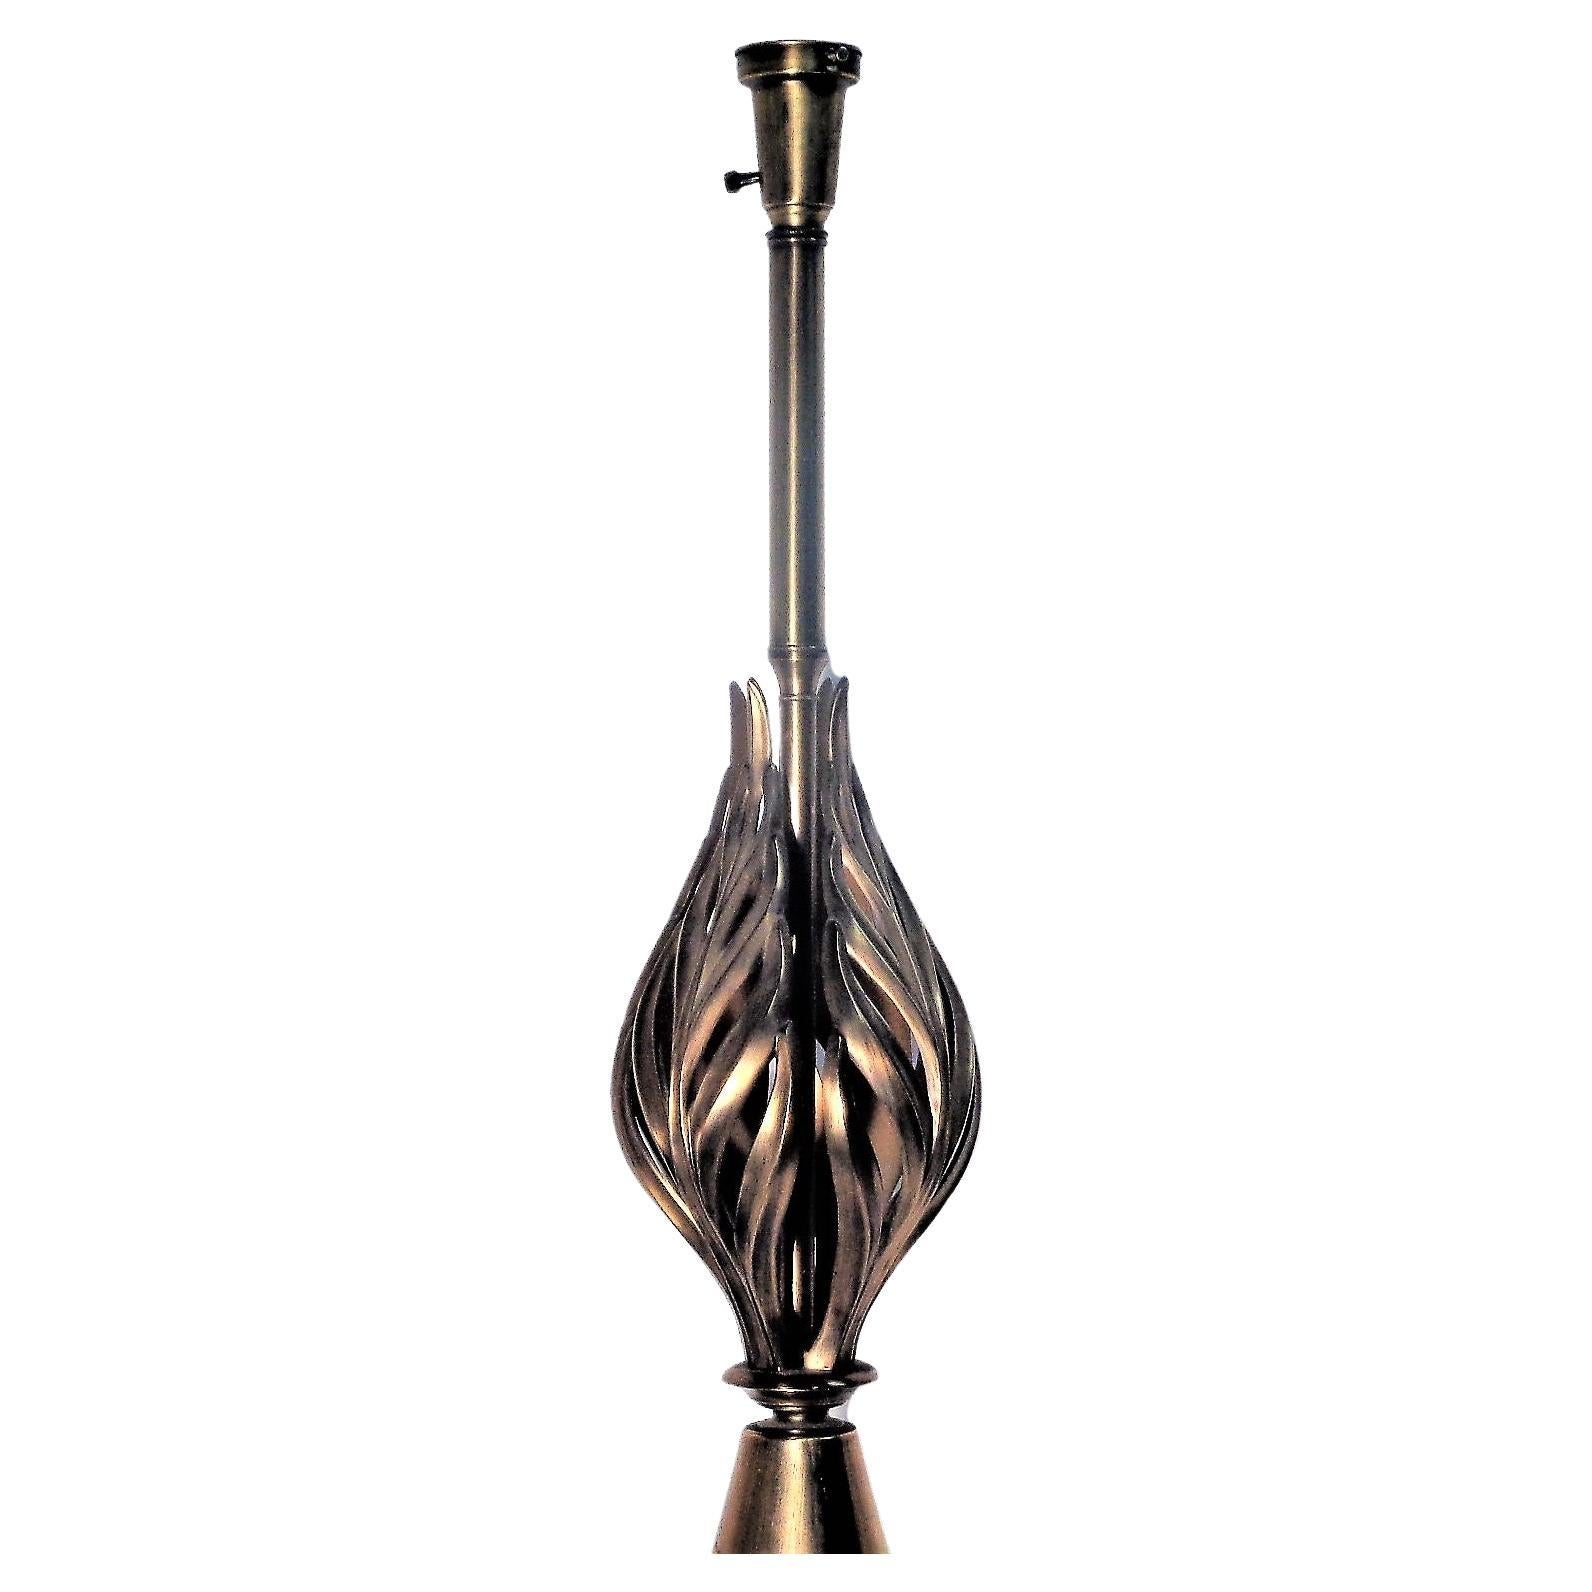 Large brass metal laurel leaf design table lamp in the original bronzed factory finish by Rembrandt Lamp Company, circa 1960. Measurements are 36